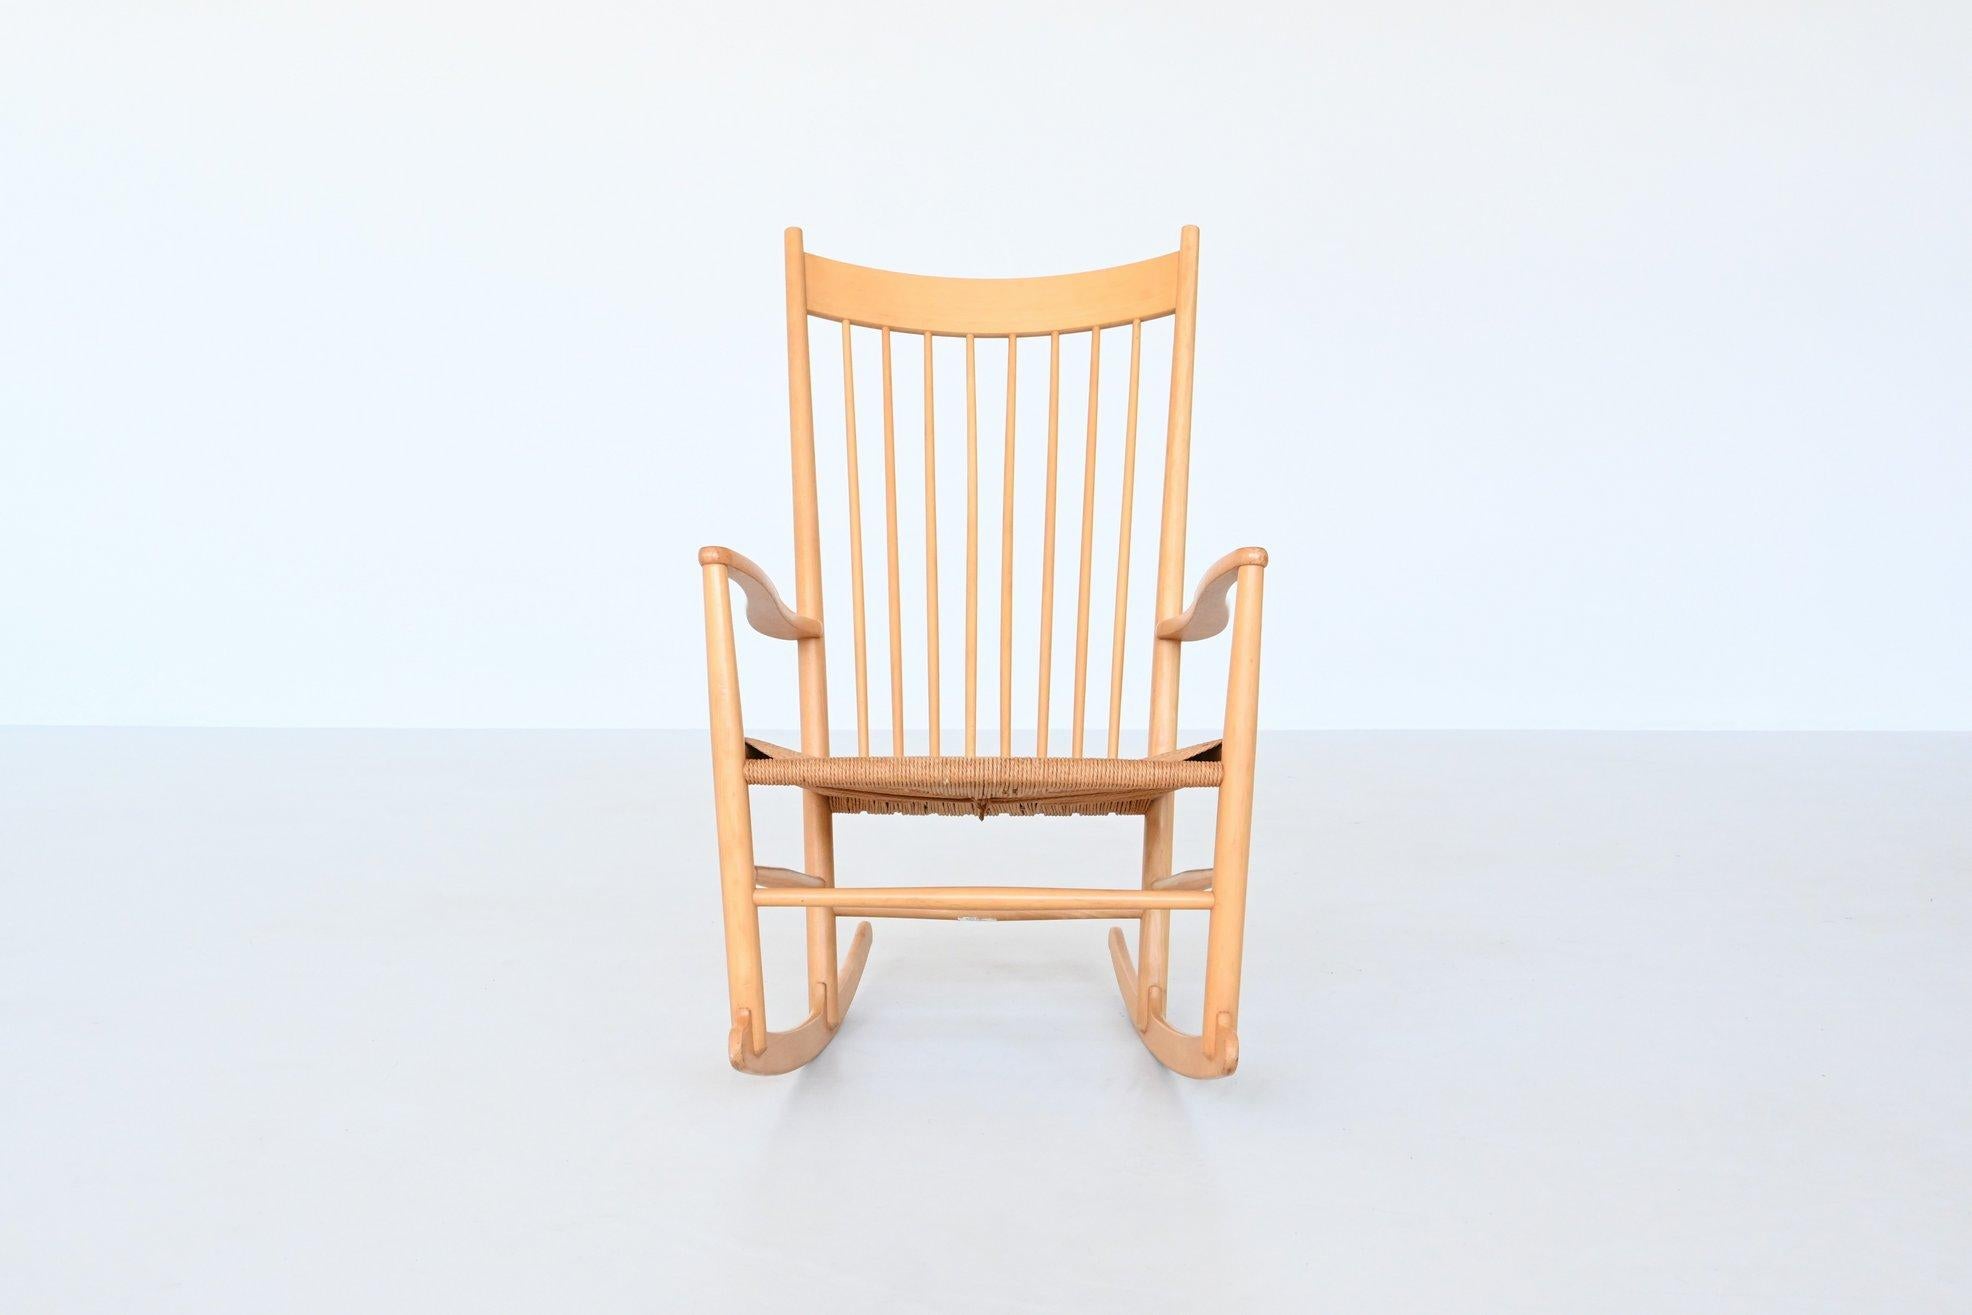 Iconic rocking chair model J16 designed in 1944 by Hans J. Wegner and manufactured by Kvist Møbler, Denmark 1970. Stunning example of Danish design with the sensually curved arms inspired by traditional Windsor and Shaker furniture, fused with